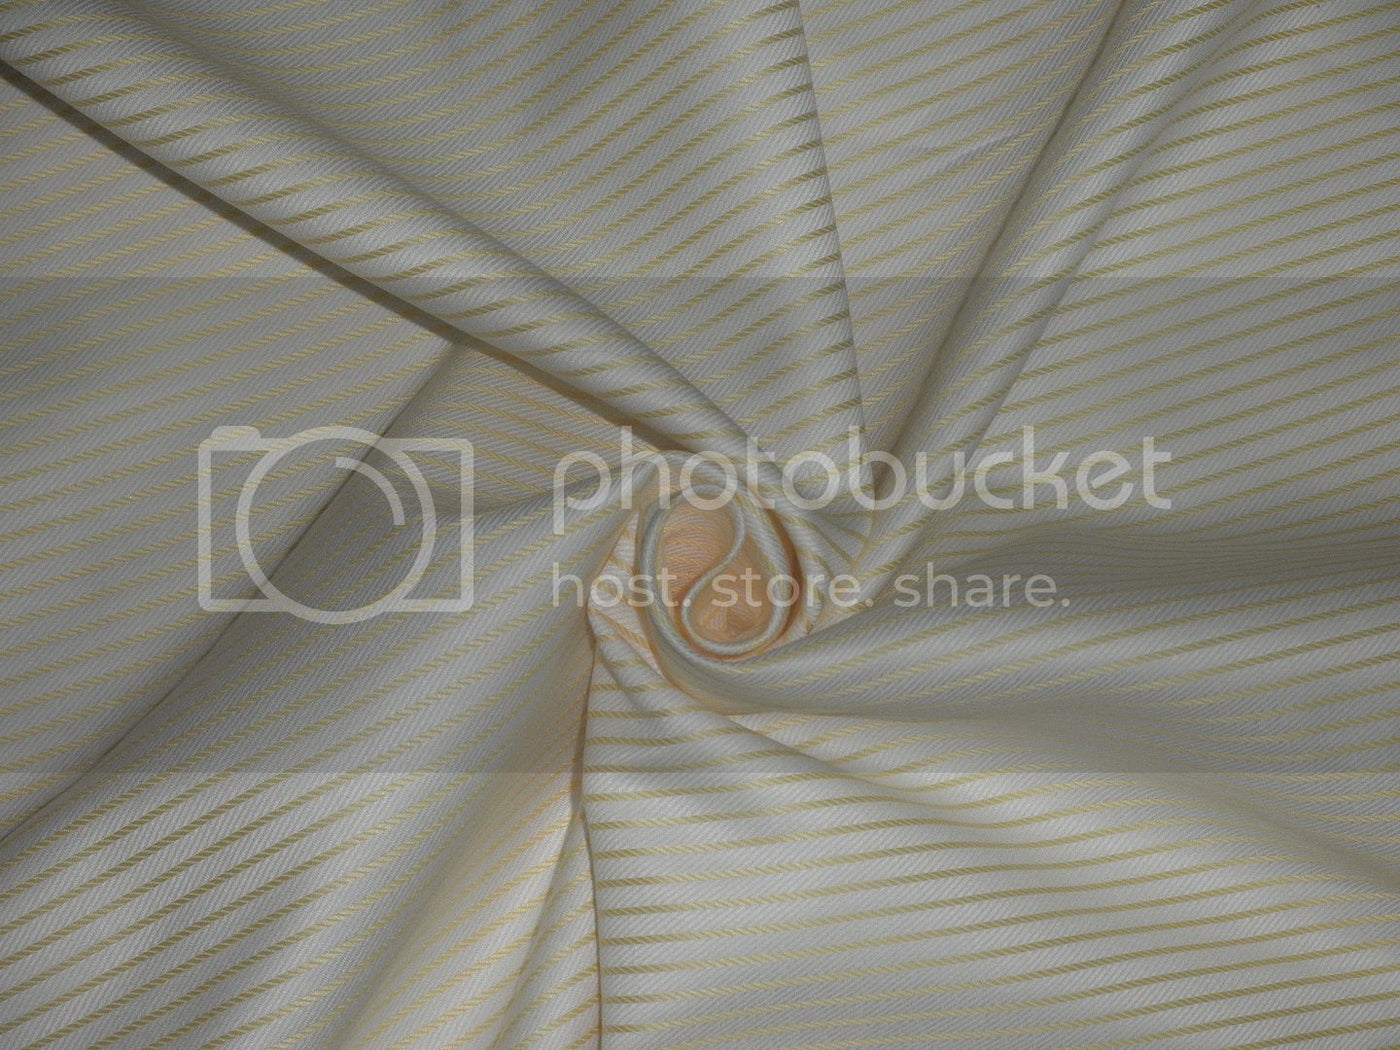 Cotton shirting fabric-twill with yellow stripes